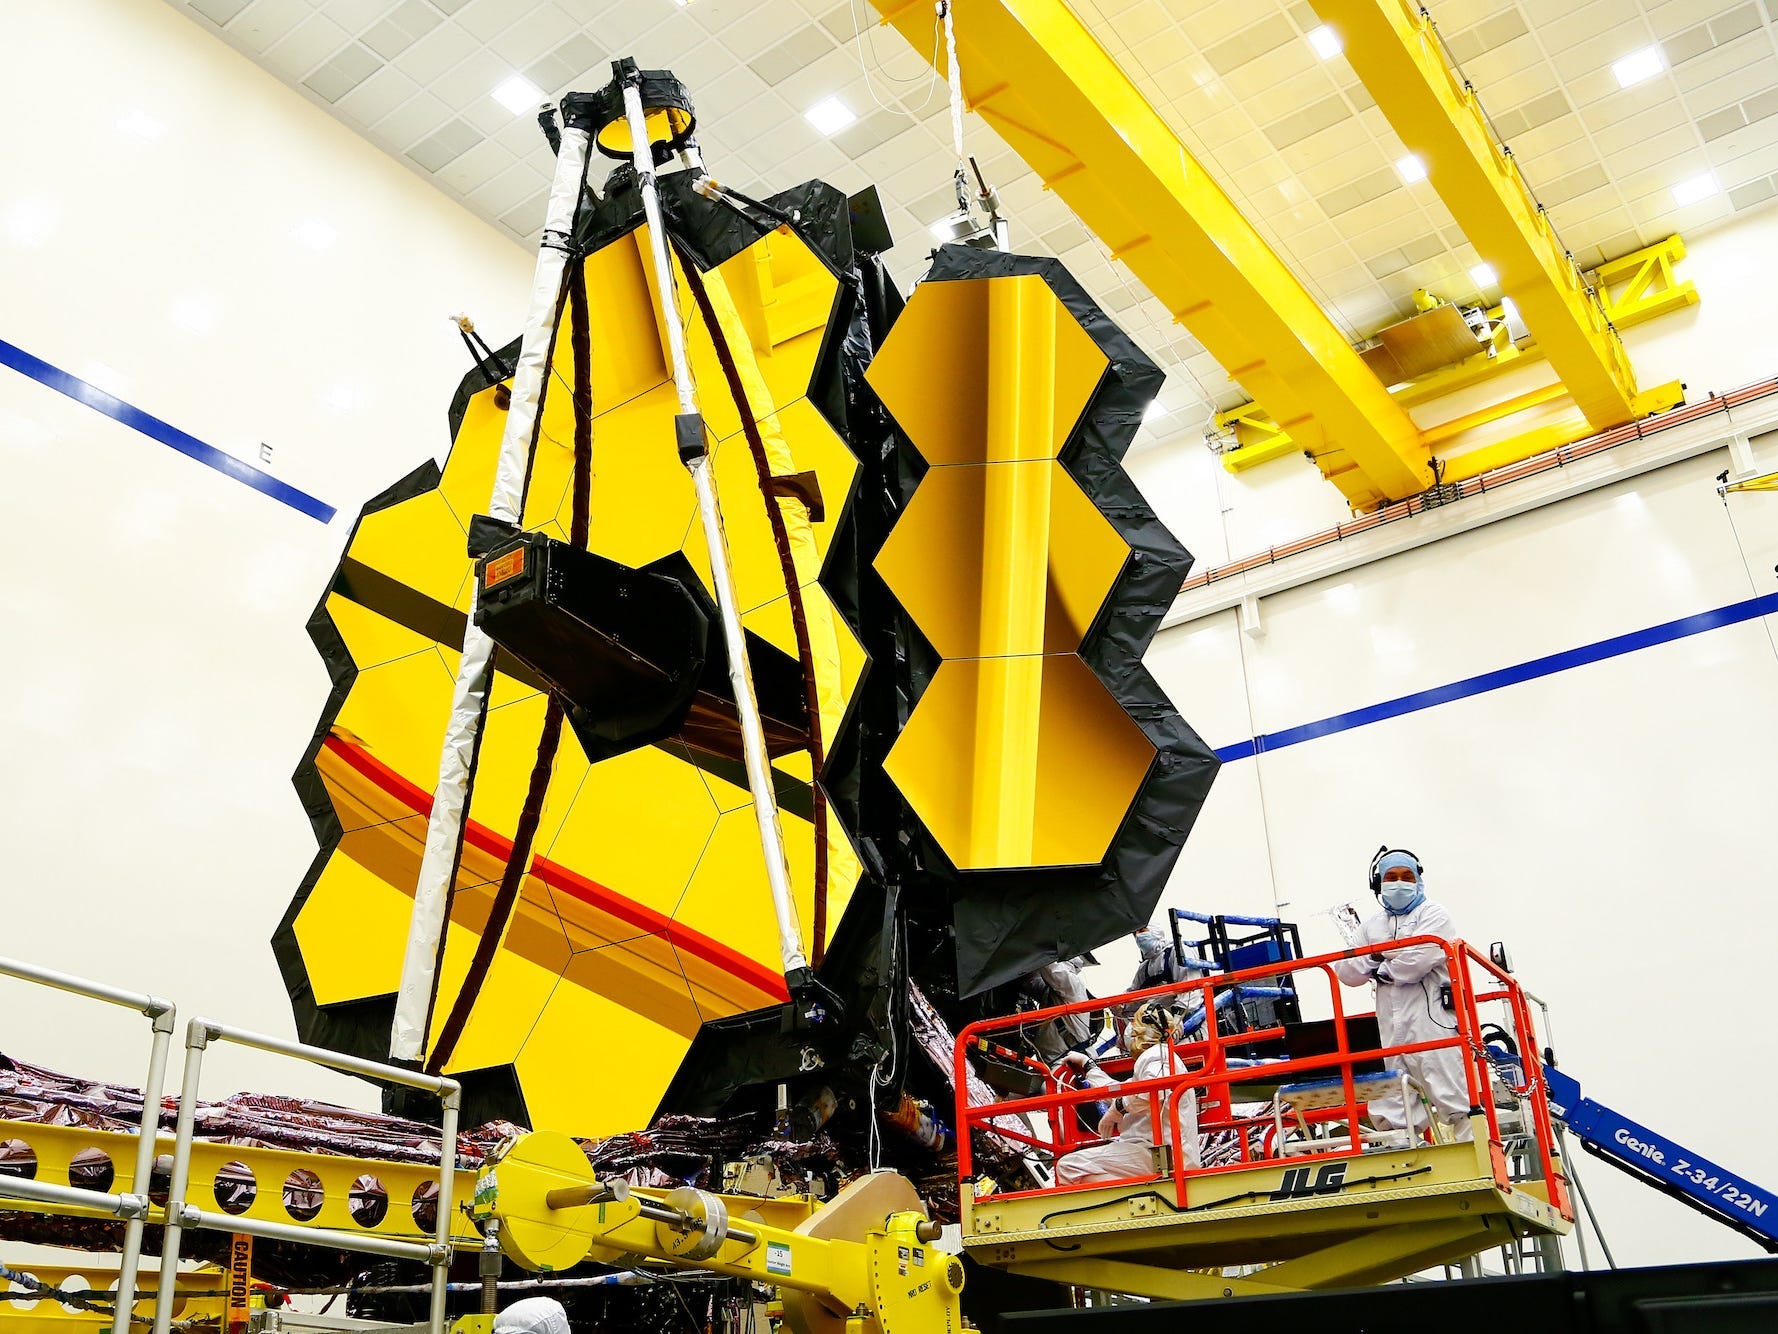 The panels of the James Webb space telescope are pictured supported by a harness behind people wearing protective suits.